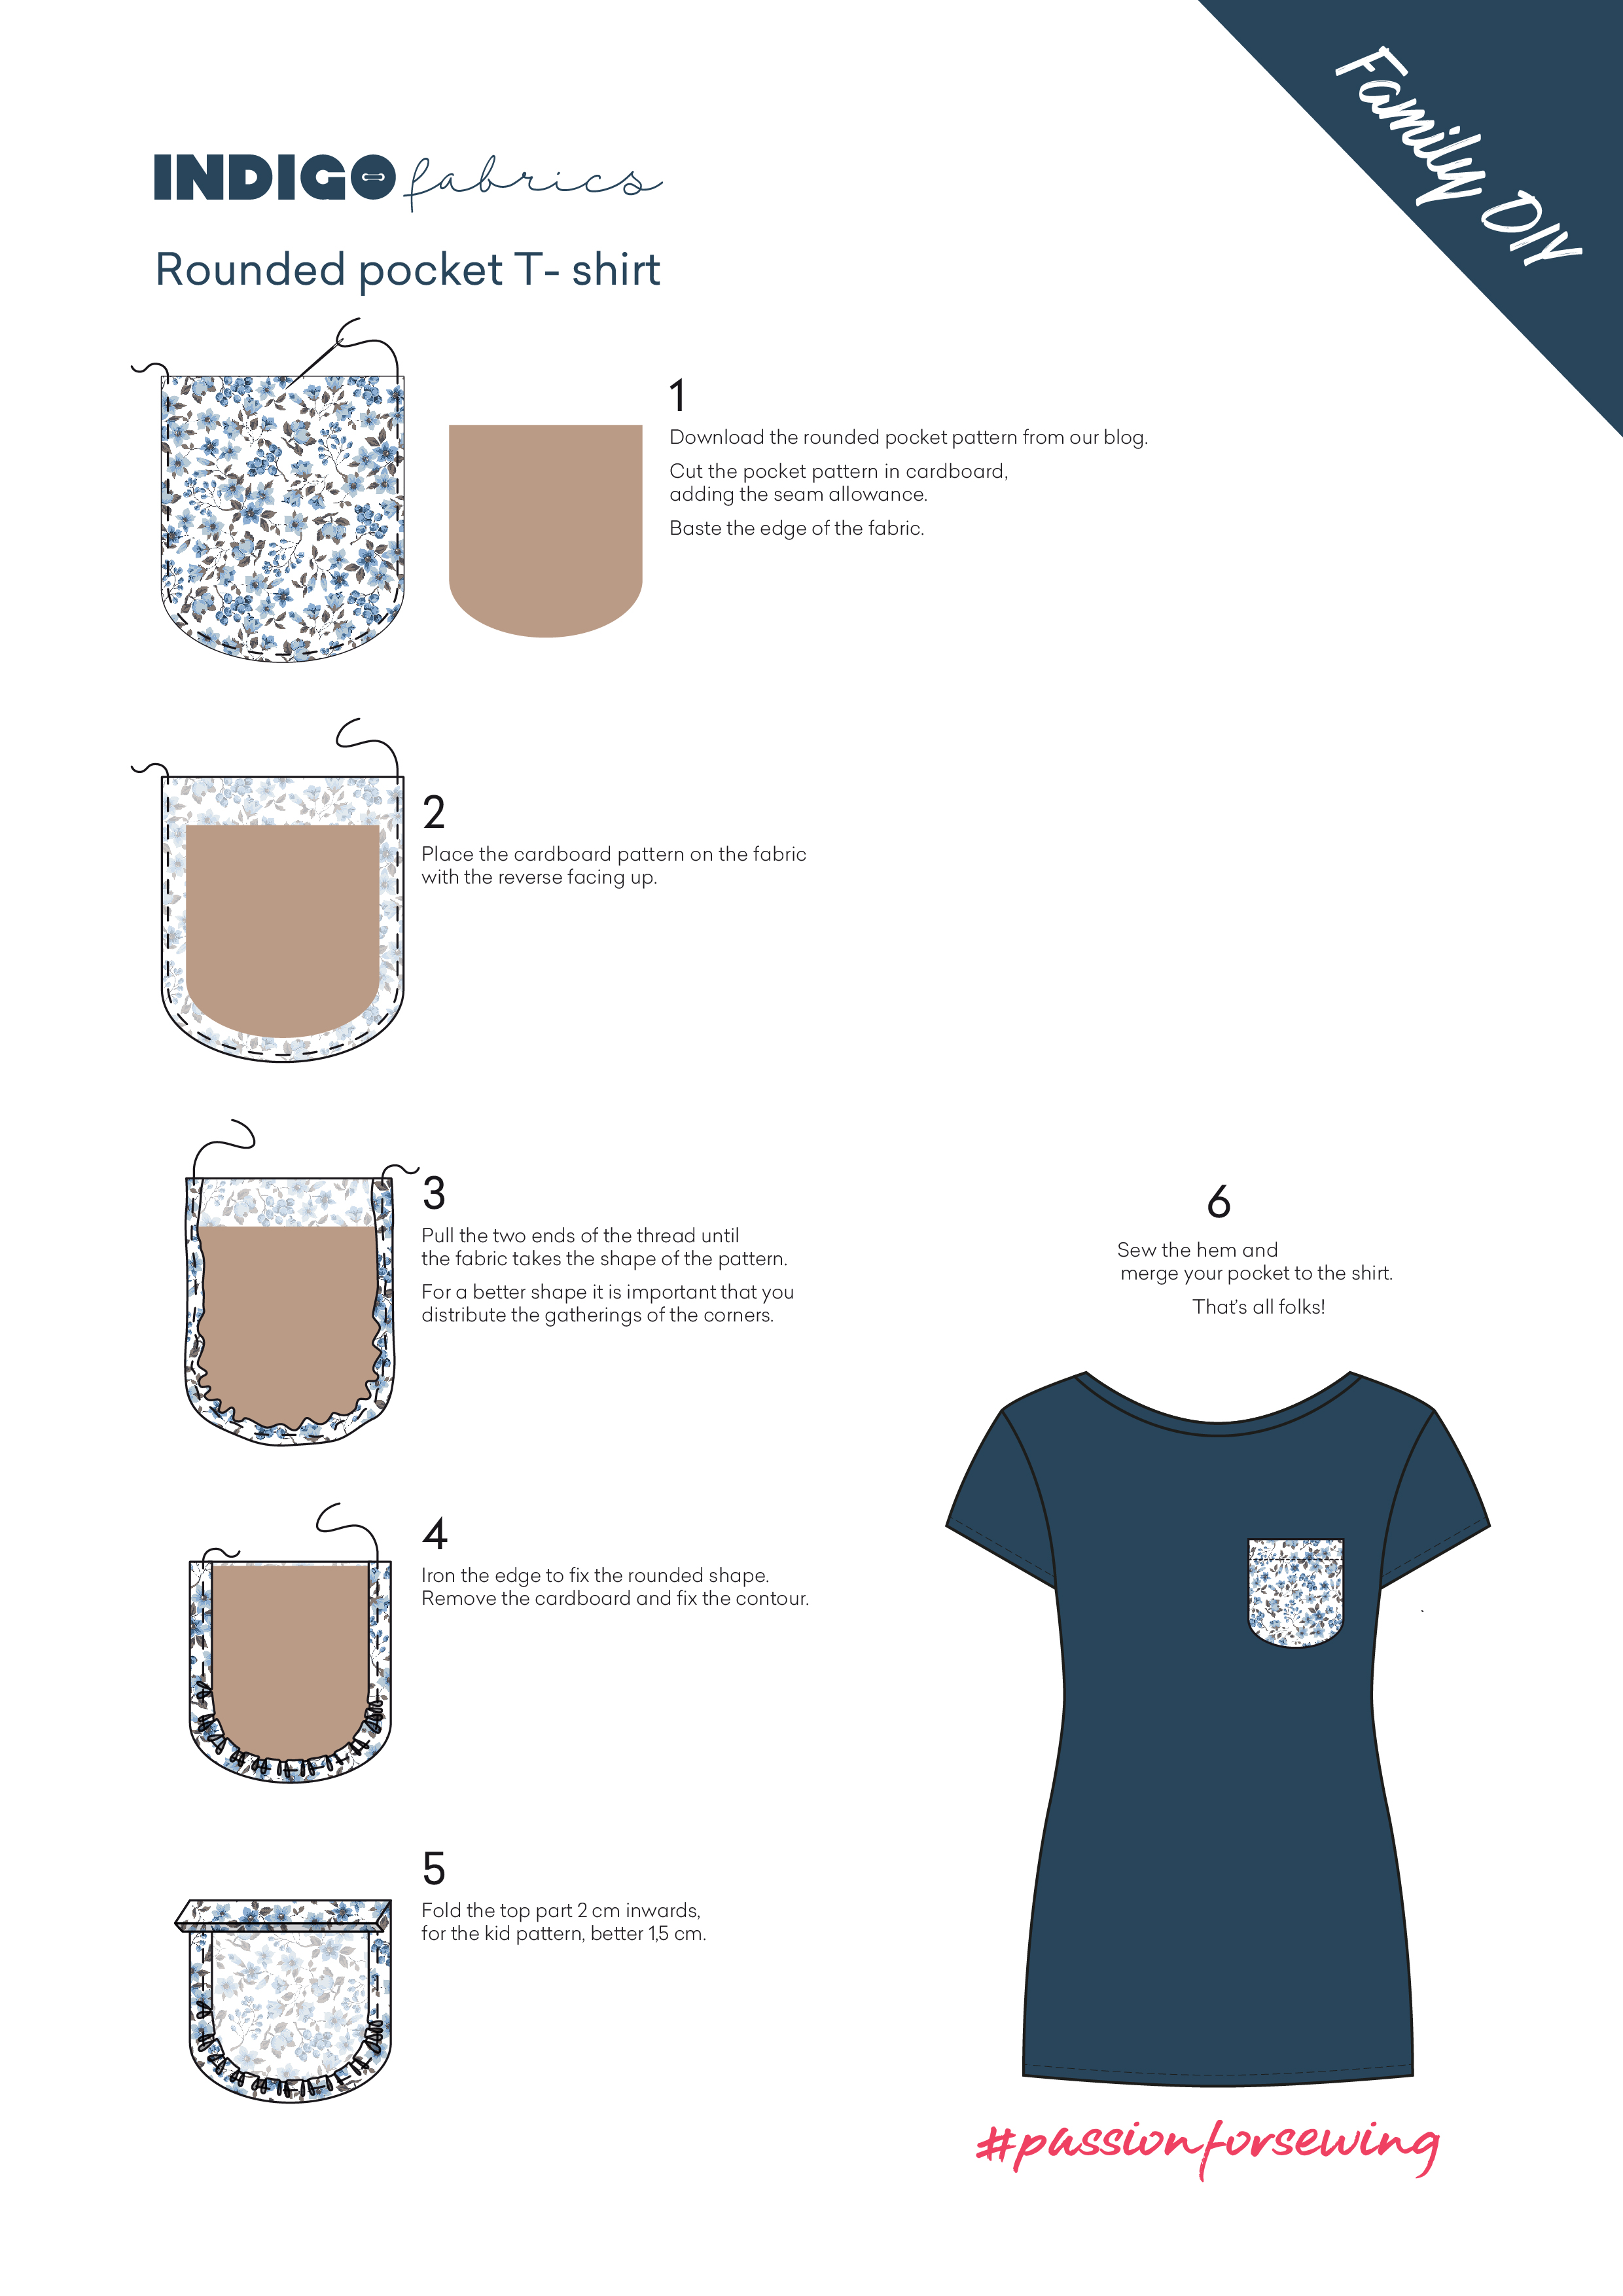 How to Sew a Rounded Pocket to a T-Shirt Step by Step